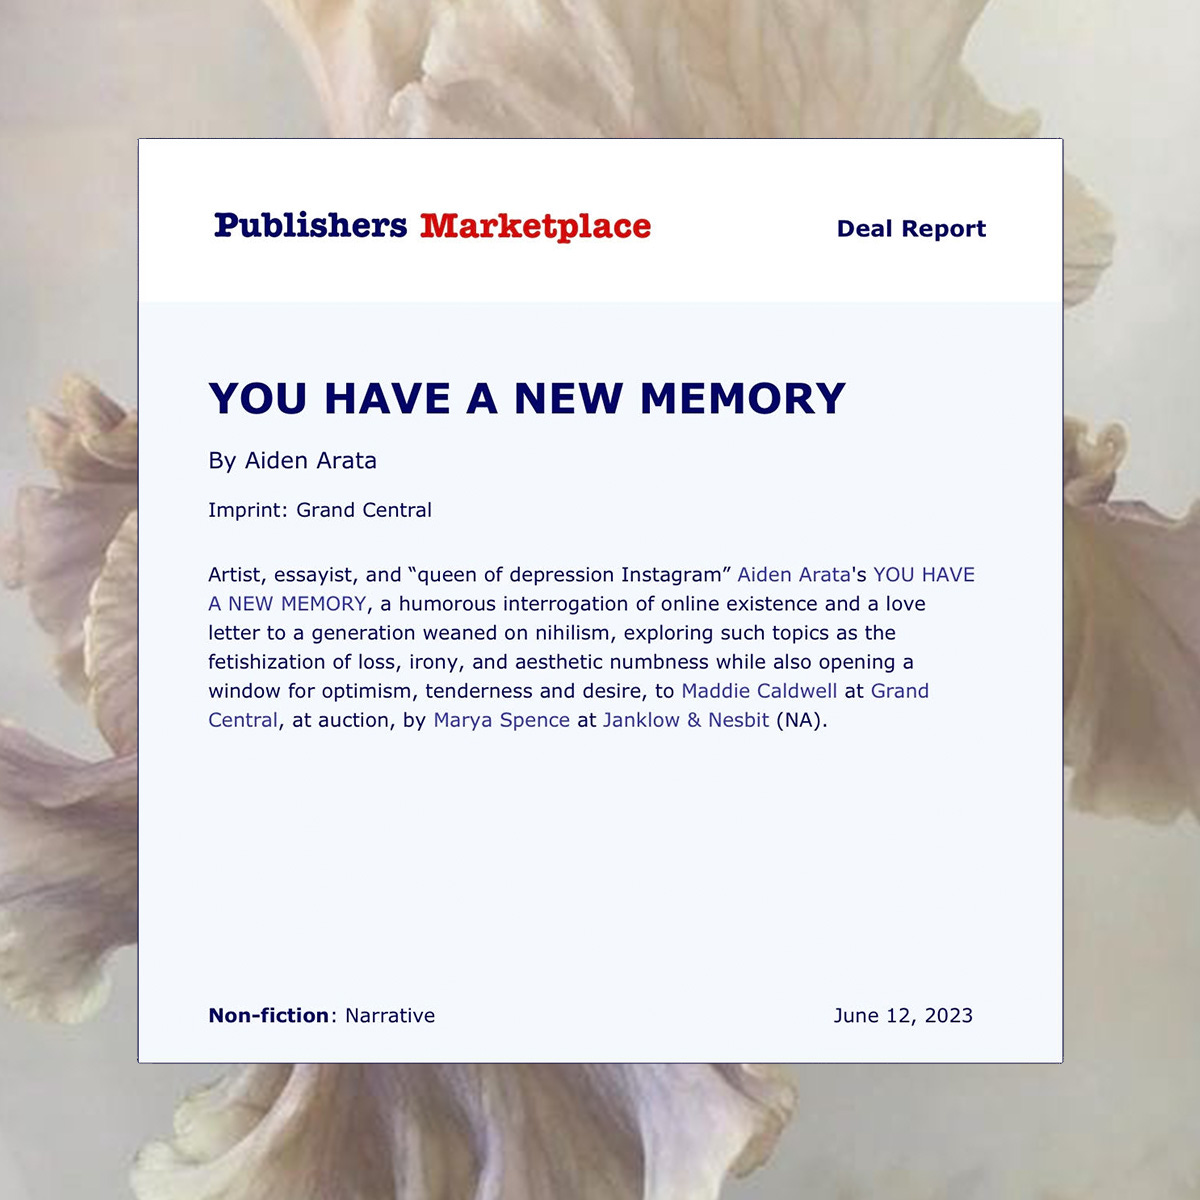 Publisher's Marketplace announcement for my book, YOU HAVE A NEW MEMORY